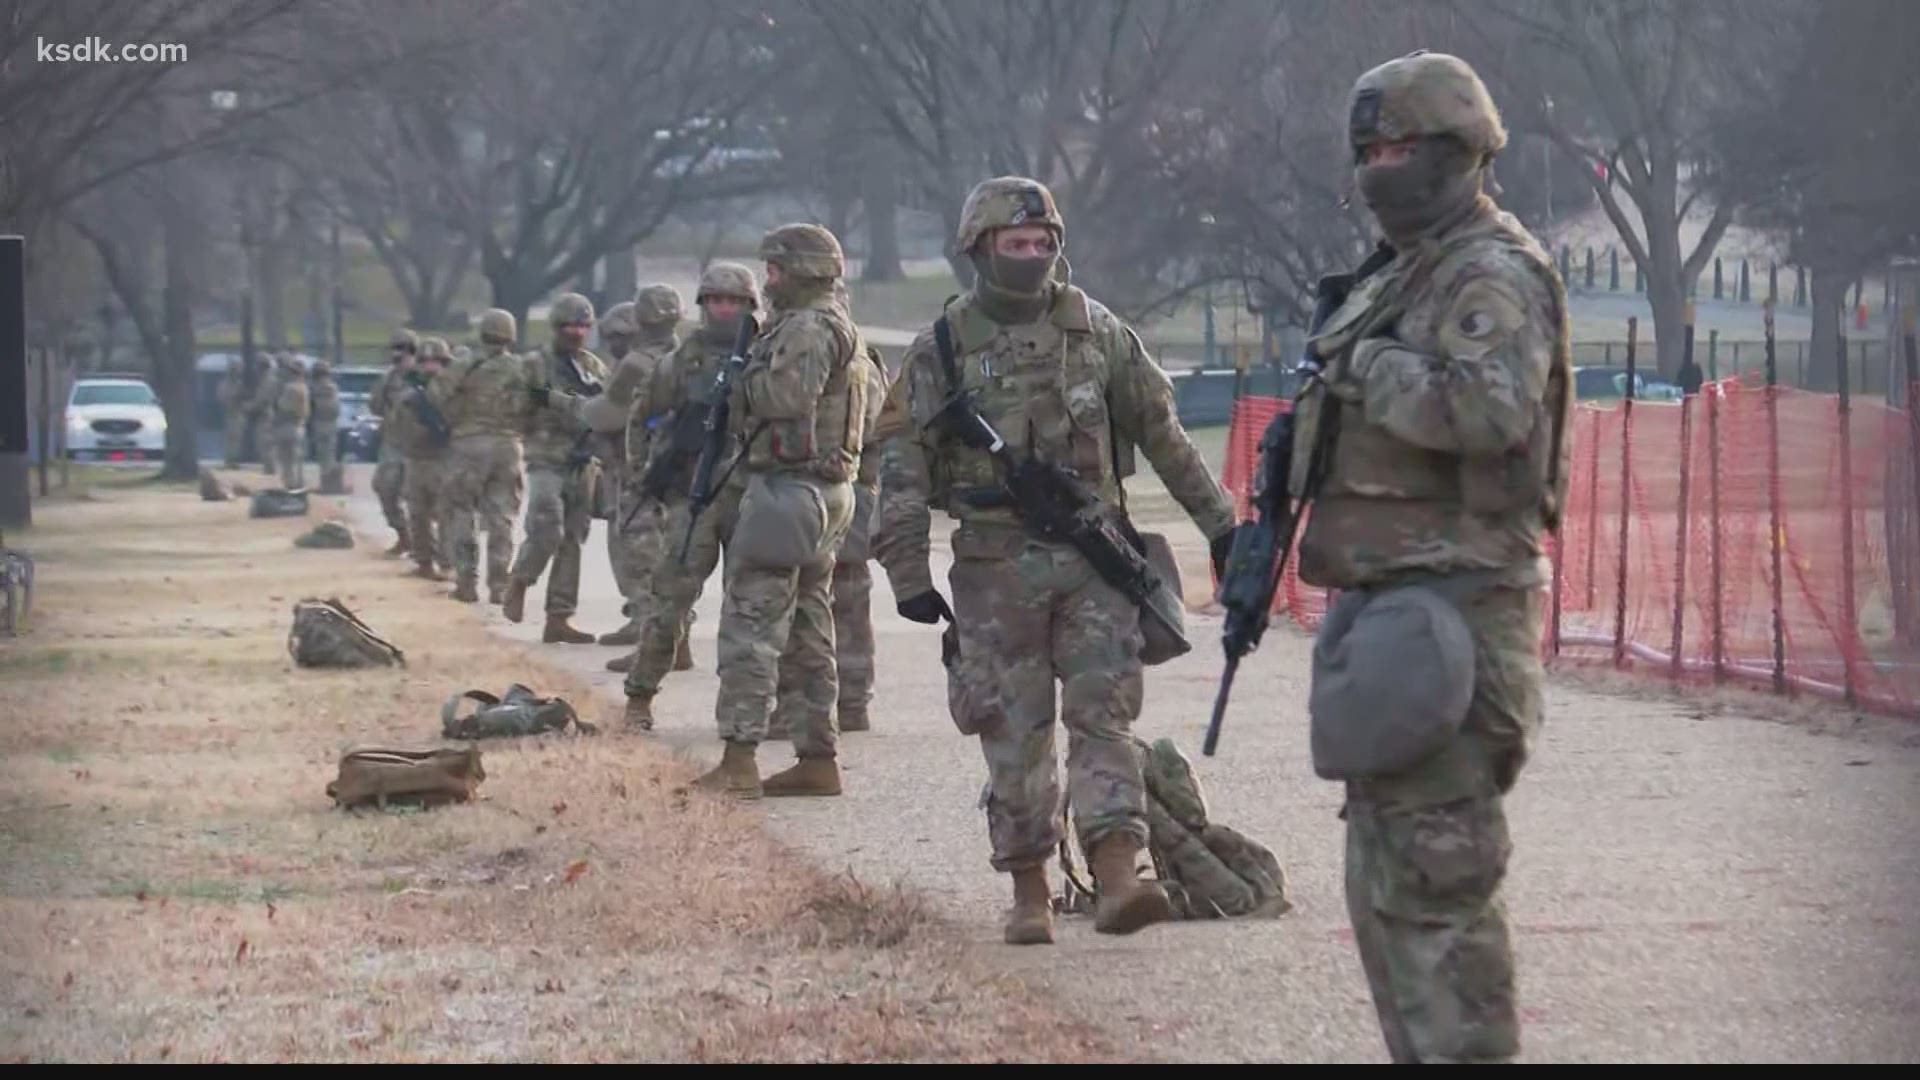 National Guard troops descend on nation's capital